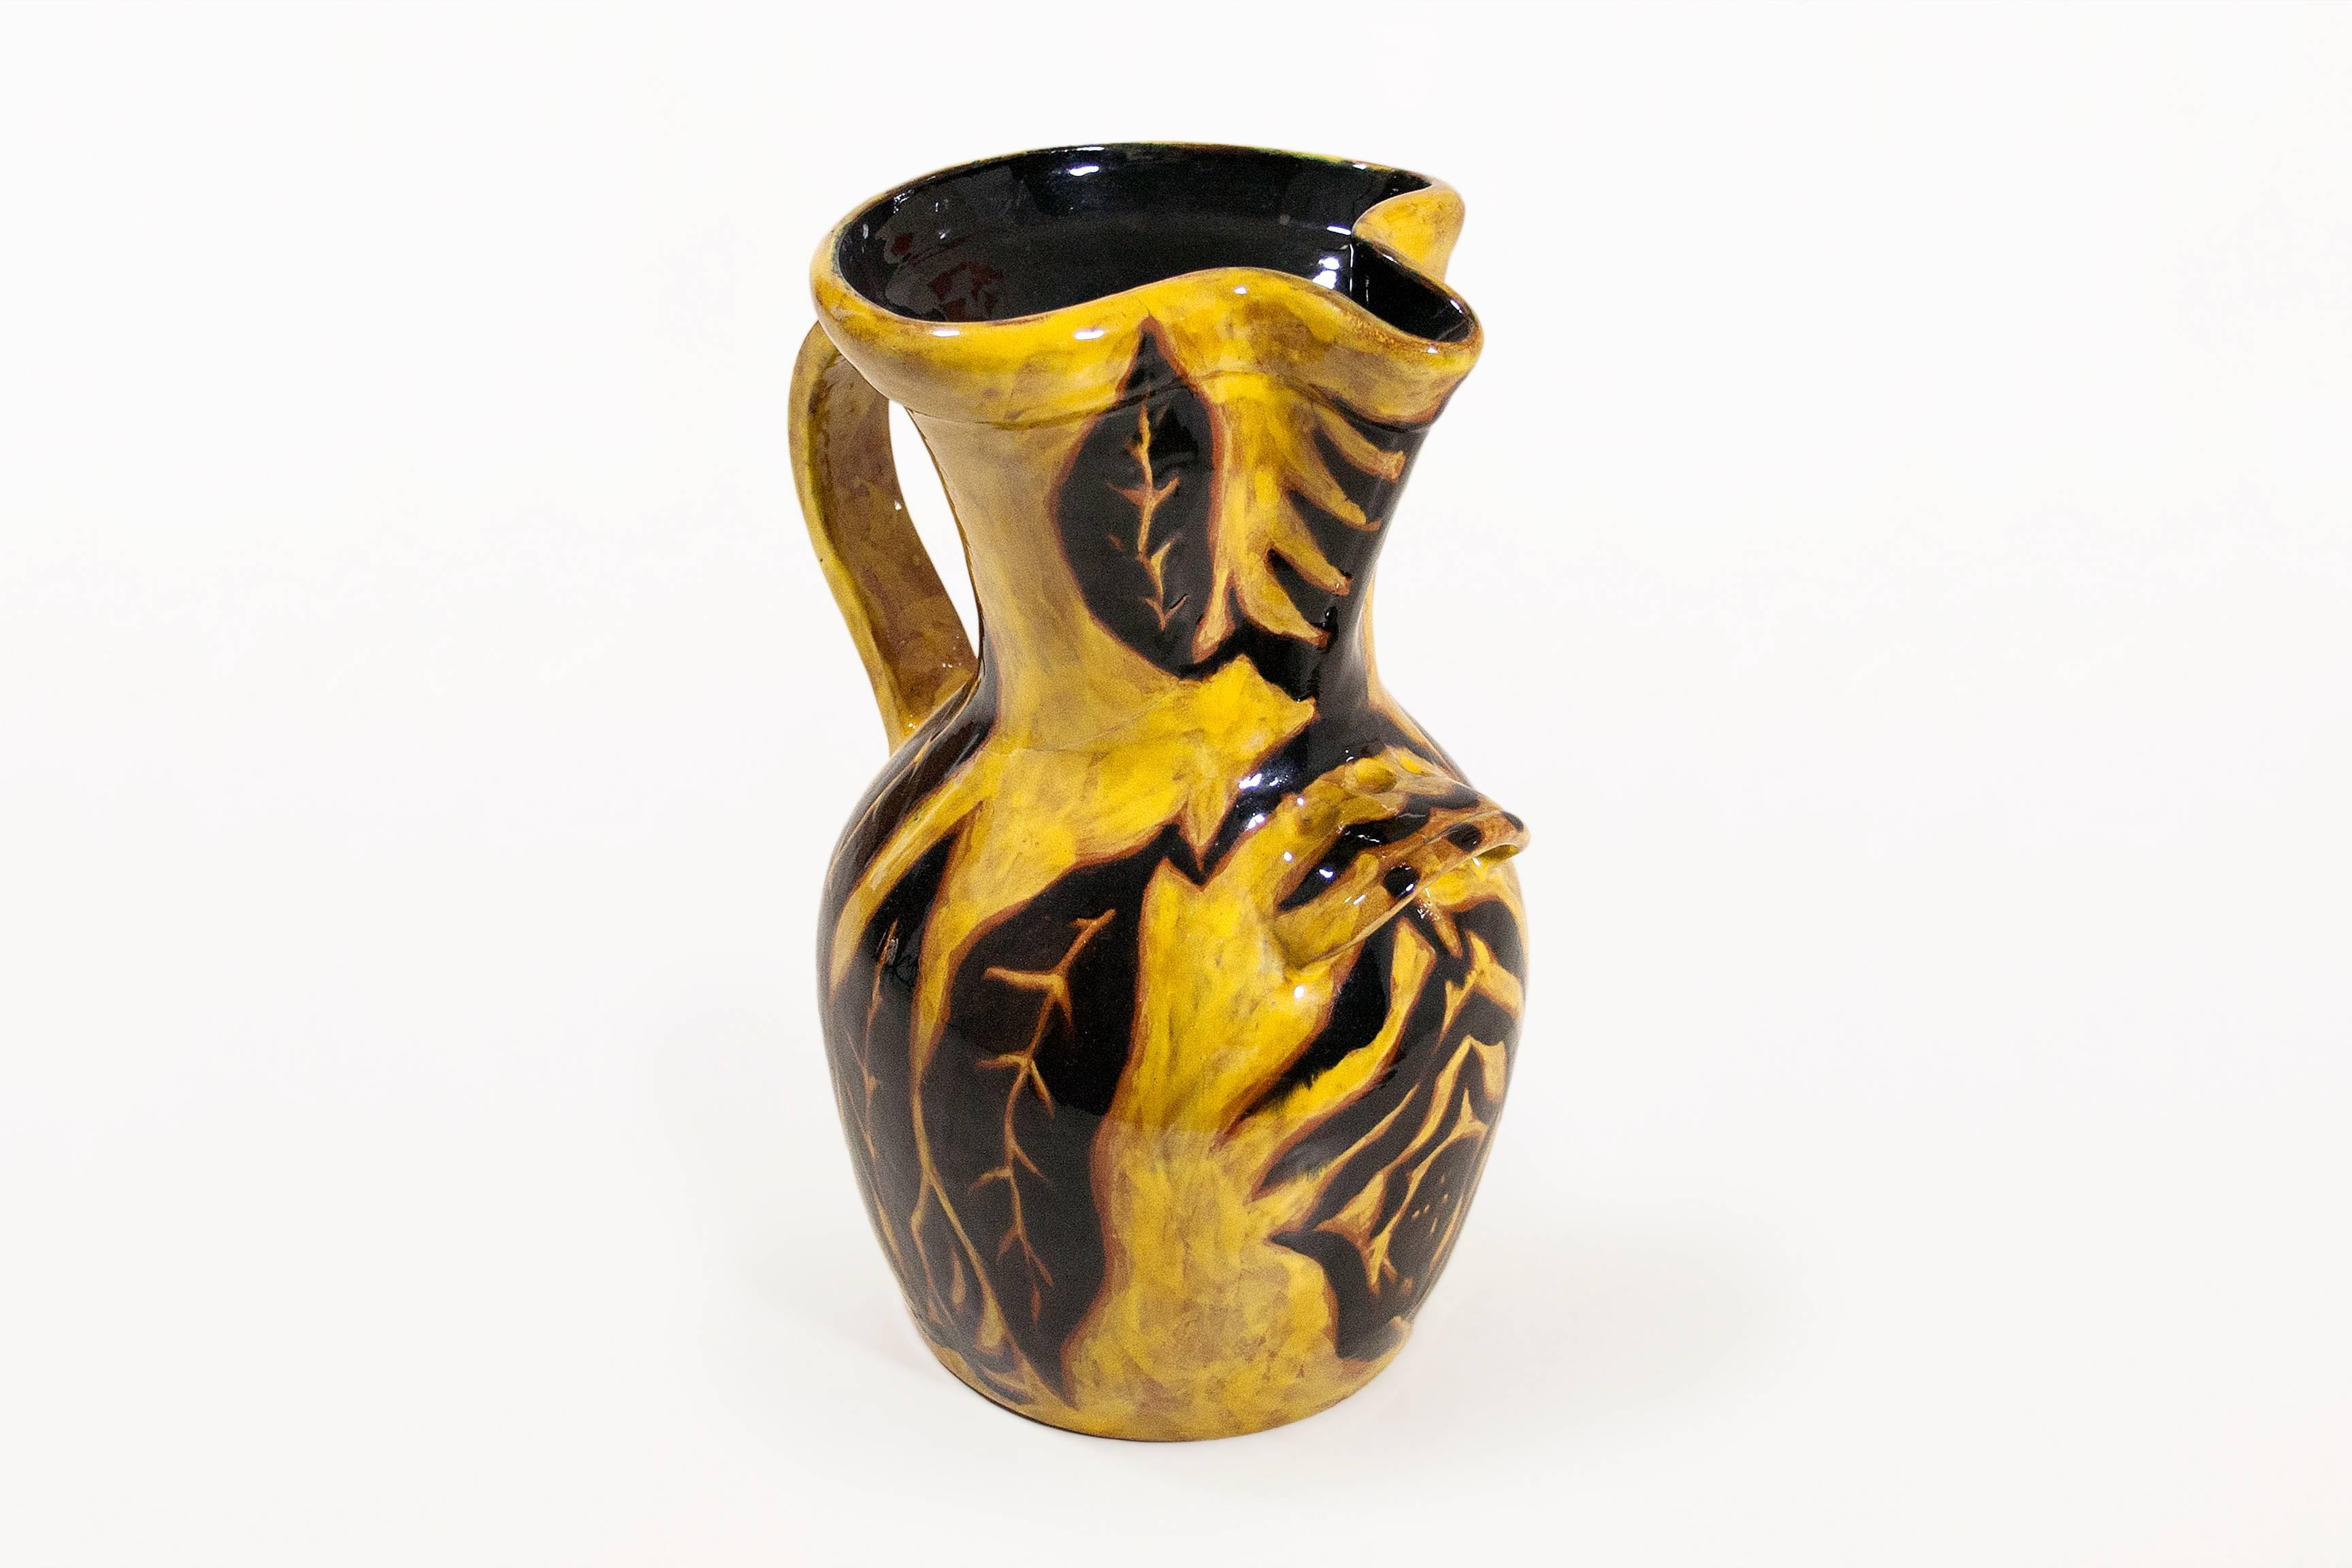 Very large yellow-glazed vase by Jean Lurçat for Sant Vincens
Typical 